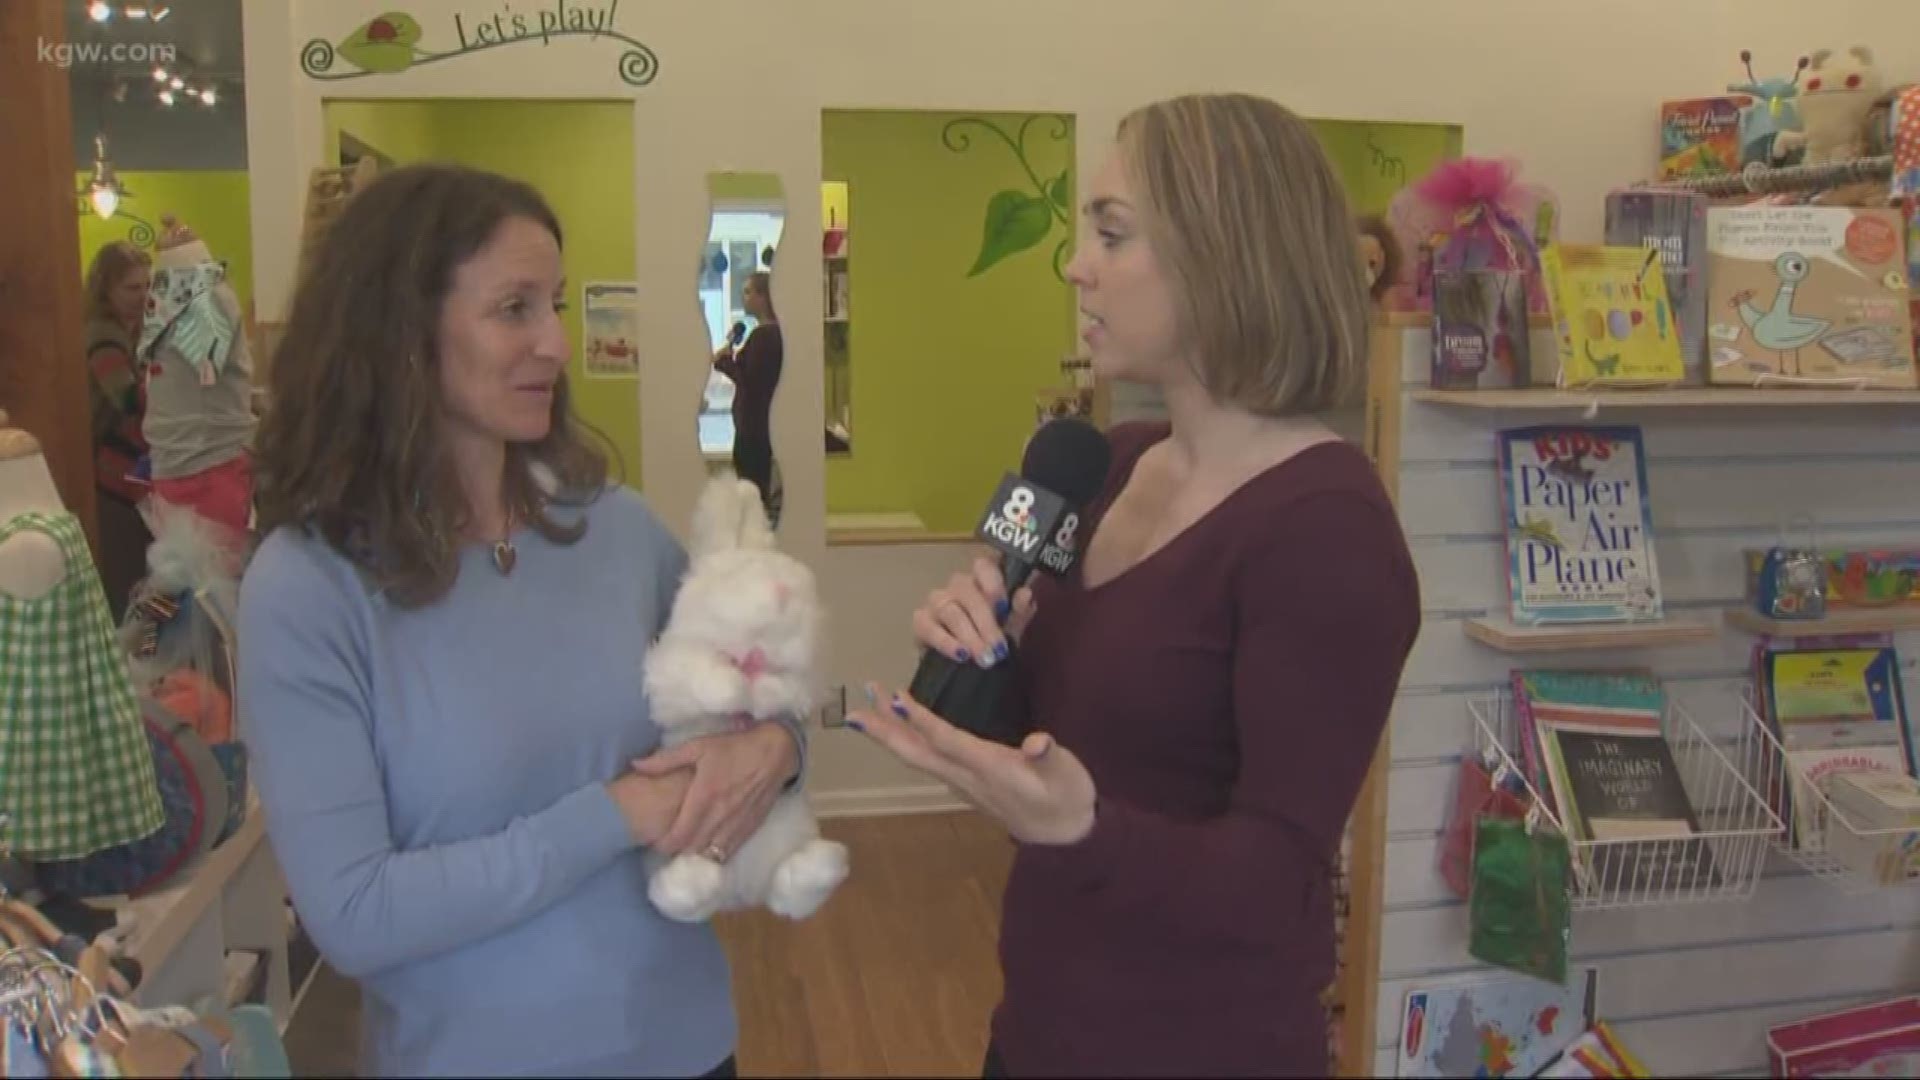 If you're looking to clear out some space in your kids' closet, you can consign some of those used outfits at Beanstalk Children's Resale. Carmen, the owner, gives us some tips on what to consign.
beanstalkchildrensresale.com